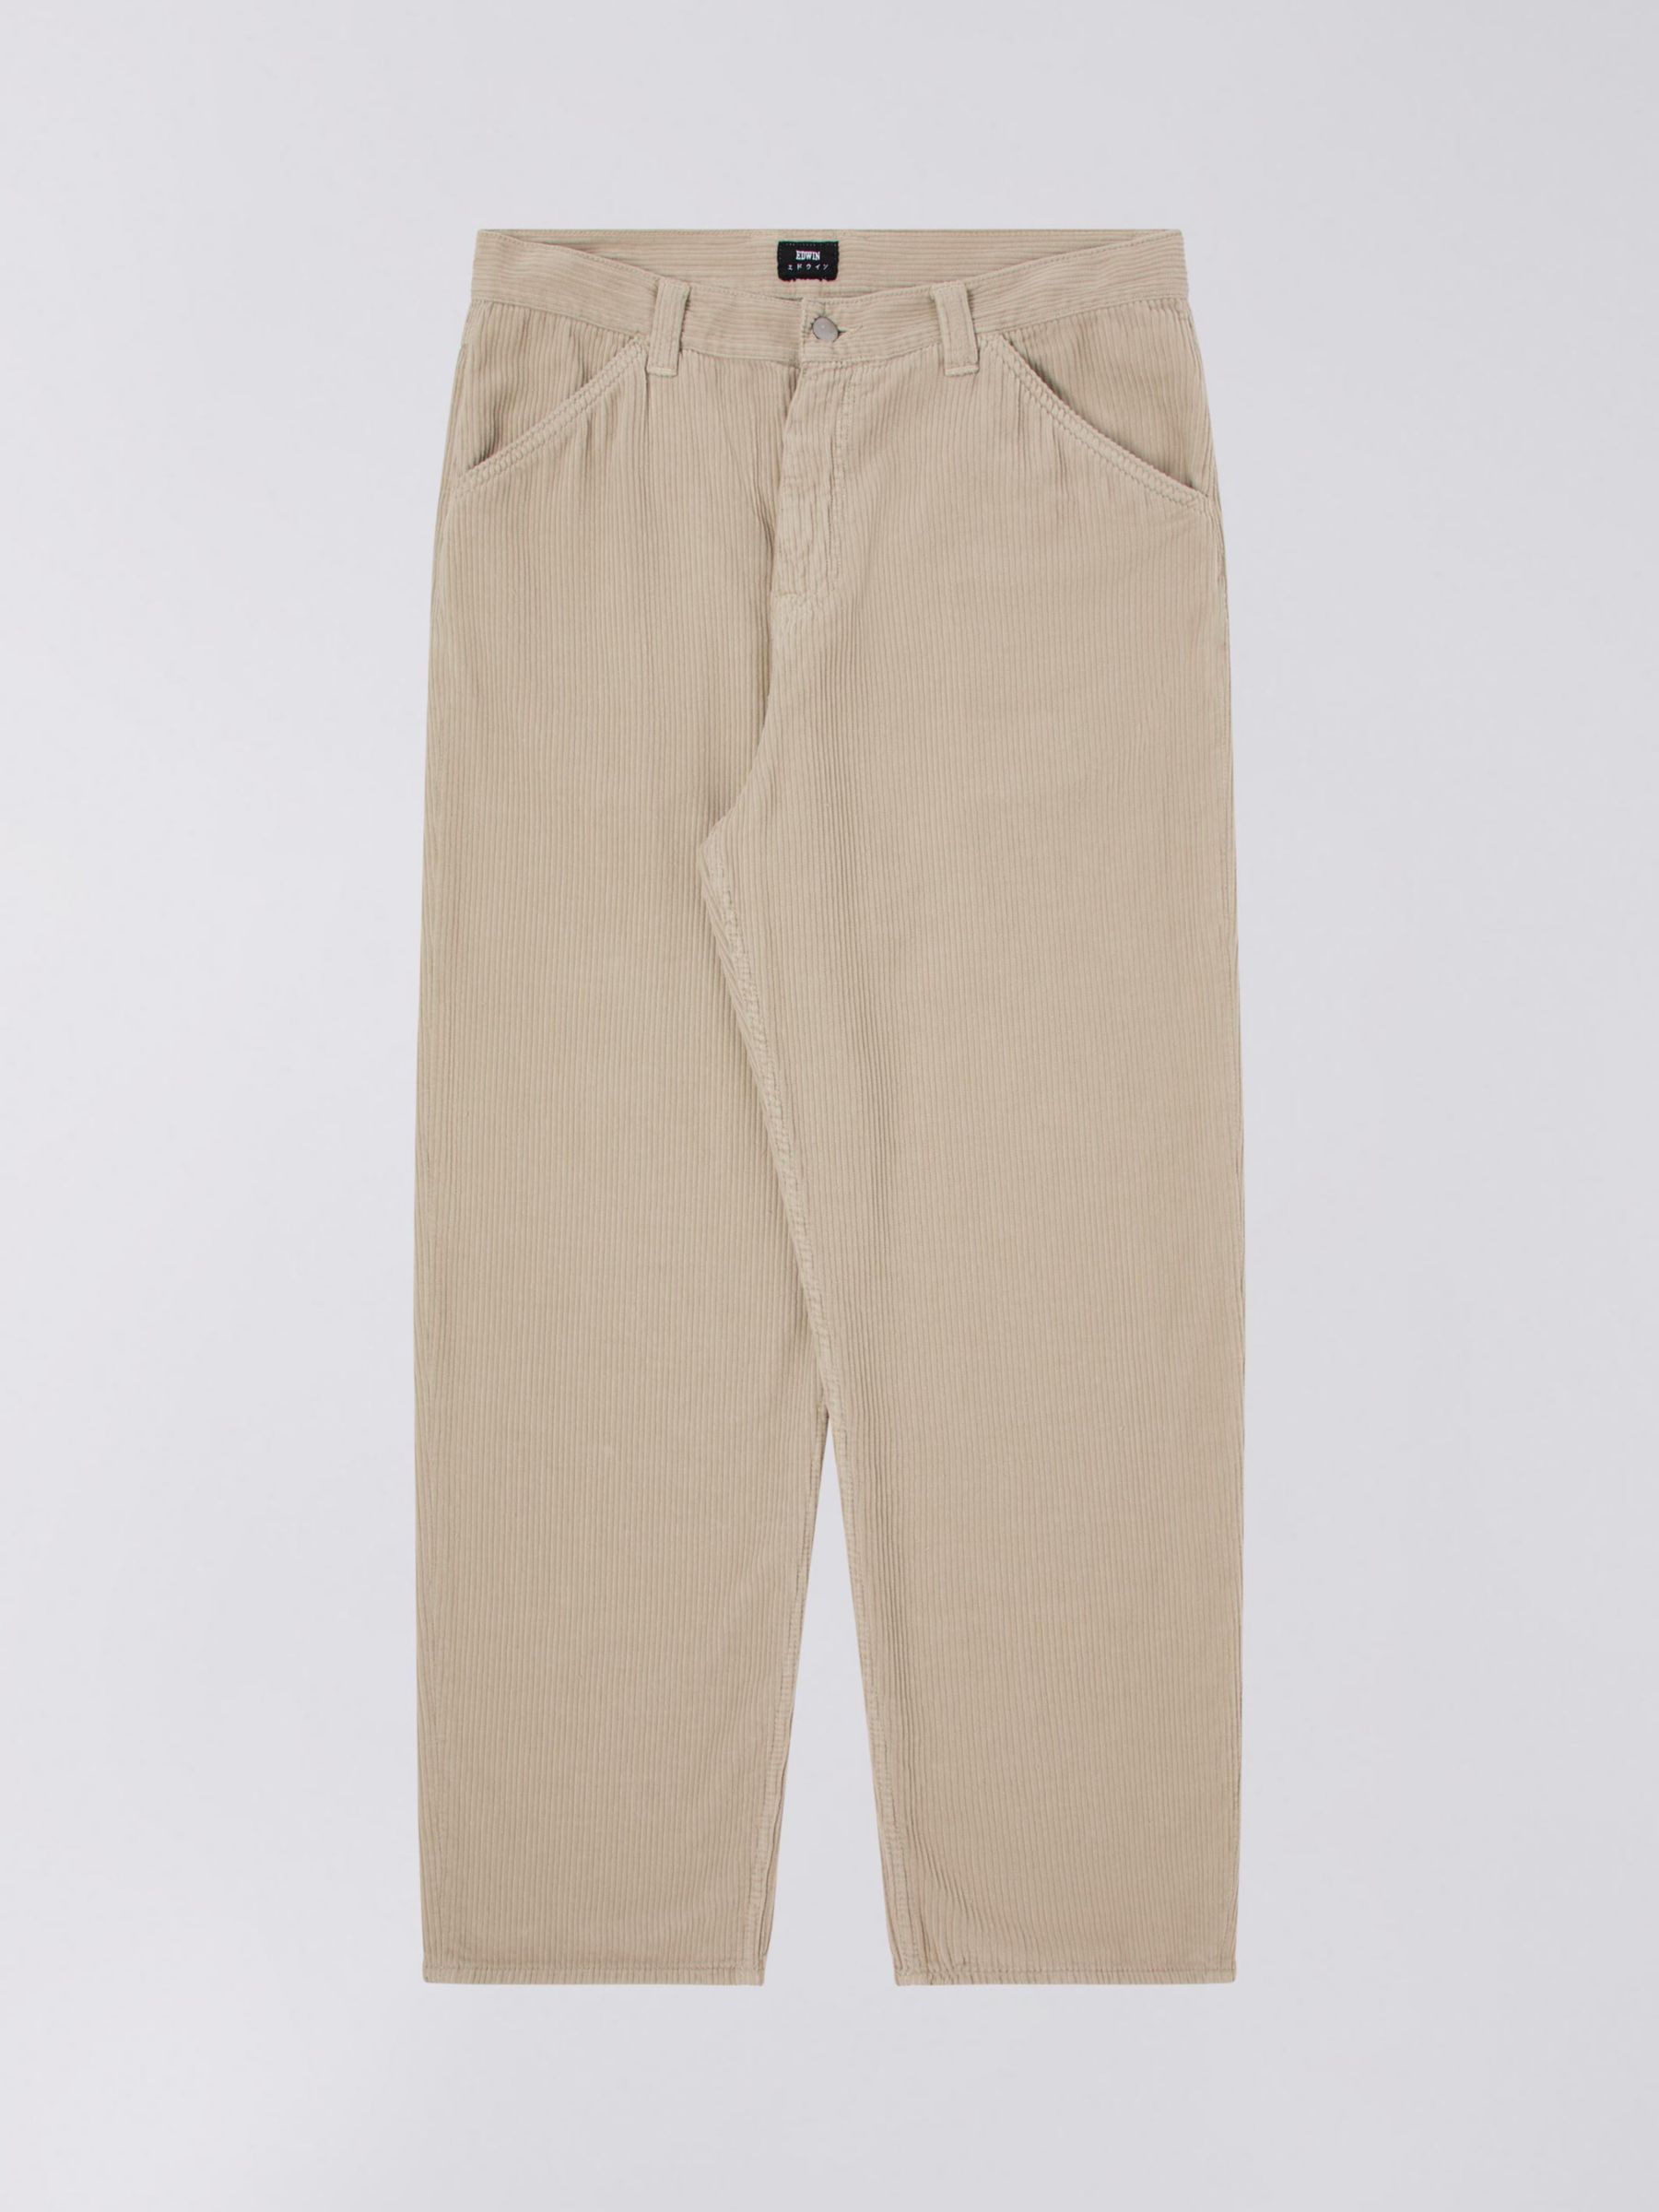 Buy Edwin Sly Relaxed Fit Corduroy Trousers, Peyote Online at johnlewis.com